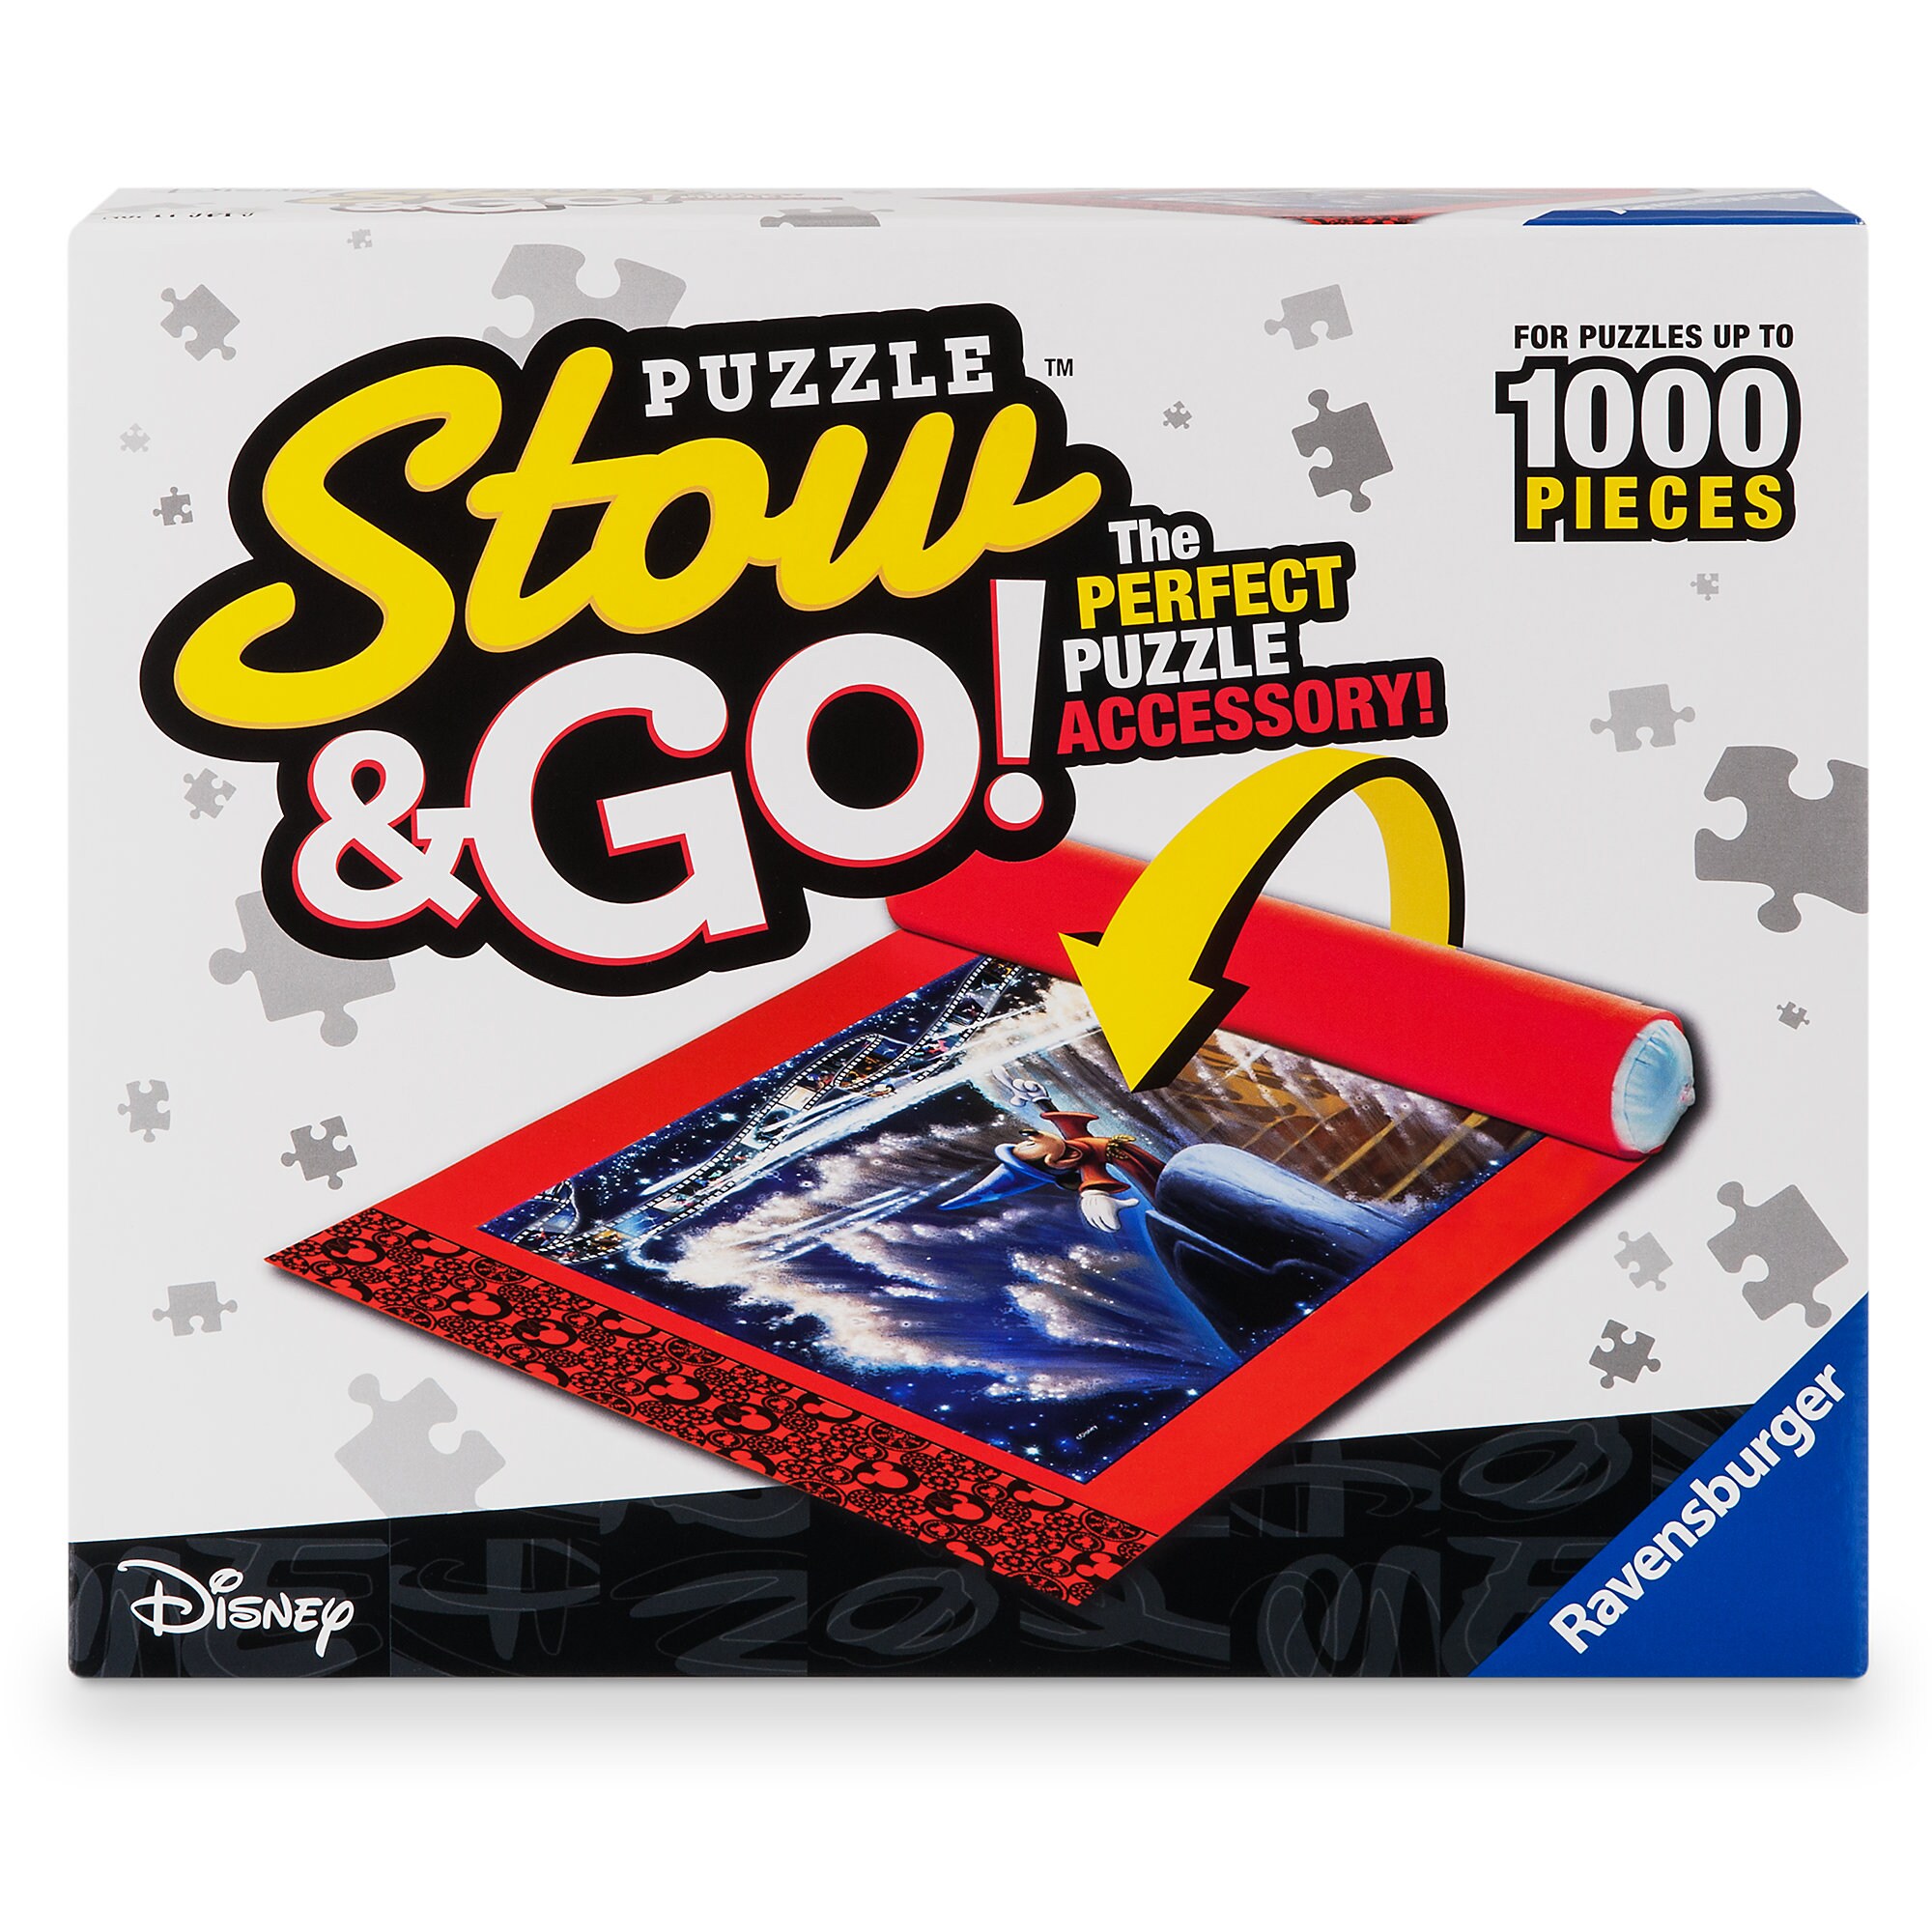 Mickey Mouse Puzzle Stow & Go! Puzzle Accessory by Ravensburger